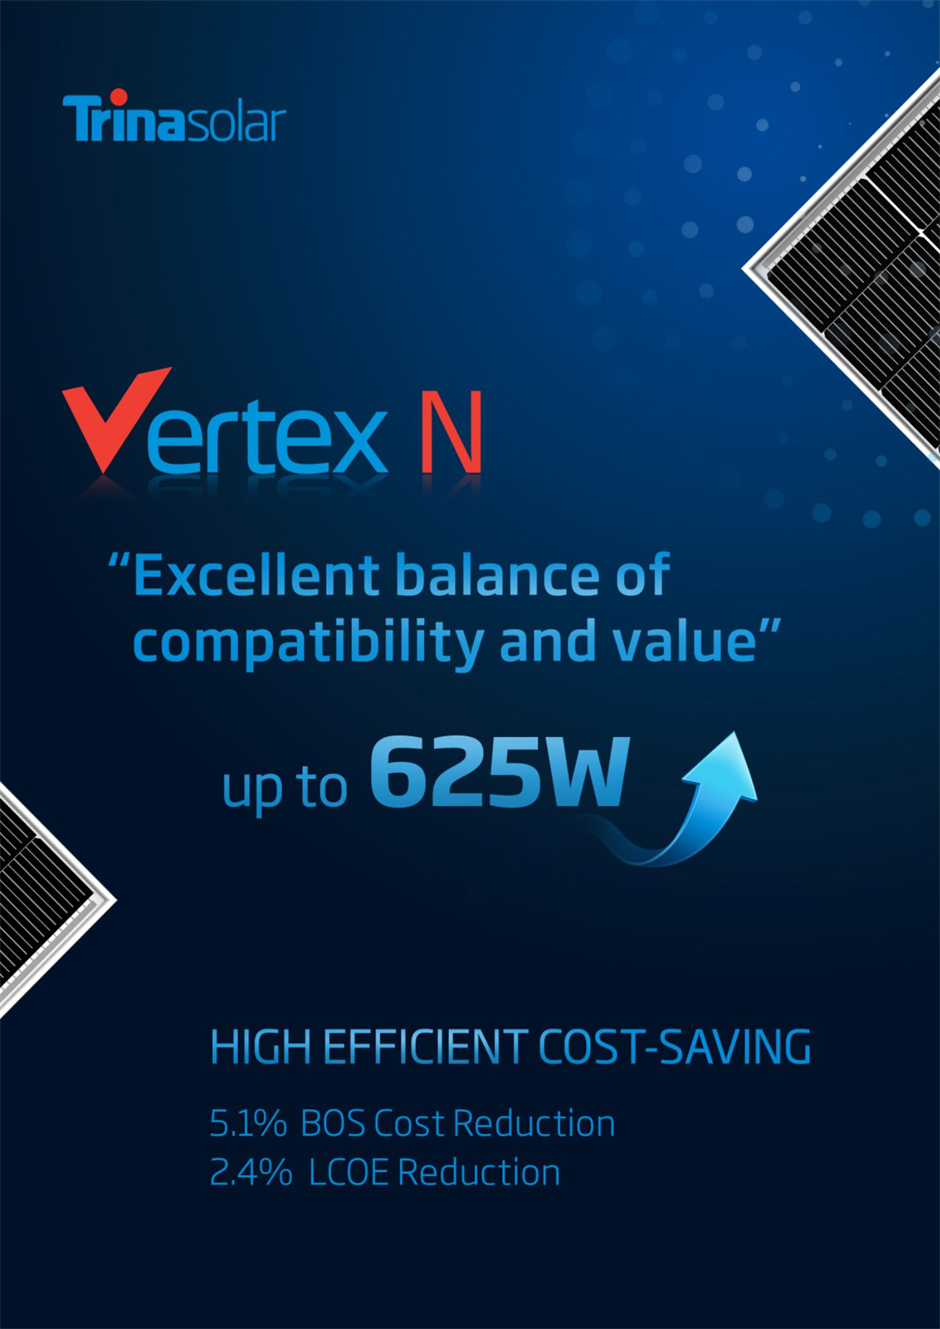 Providing excellent balance between compatibility and value, Trinasolar’s Vertex N NE19R n-type i-TOPCon bifacial solar panel delivers up to 625W power output and high cost savings. 